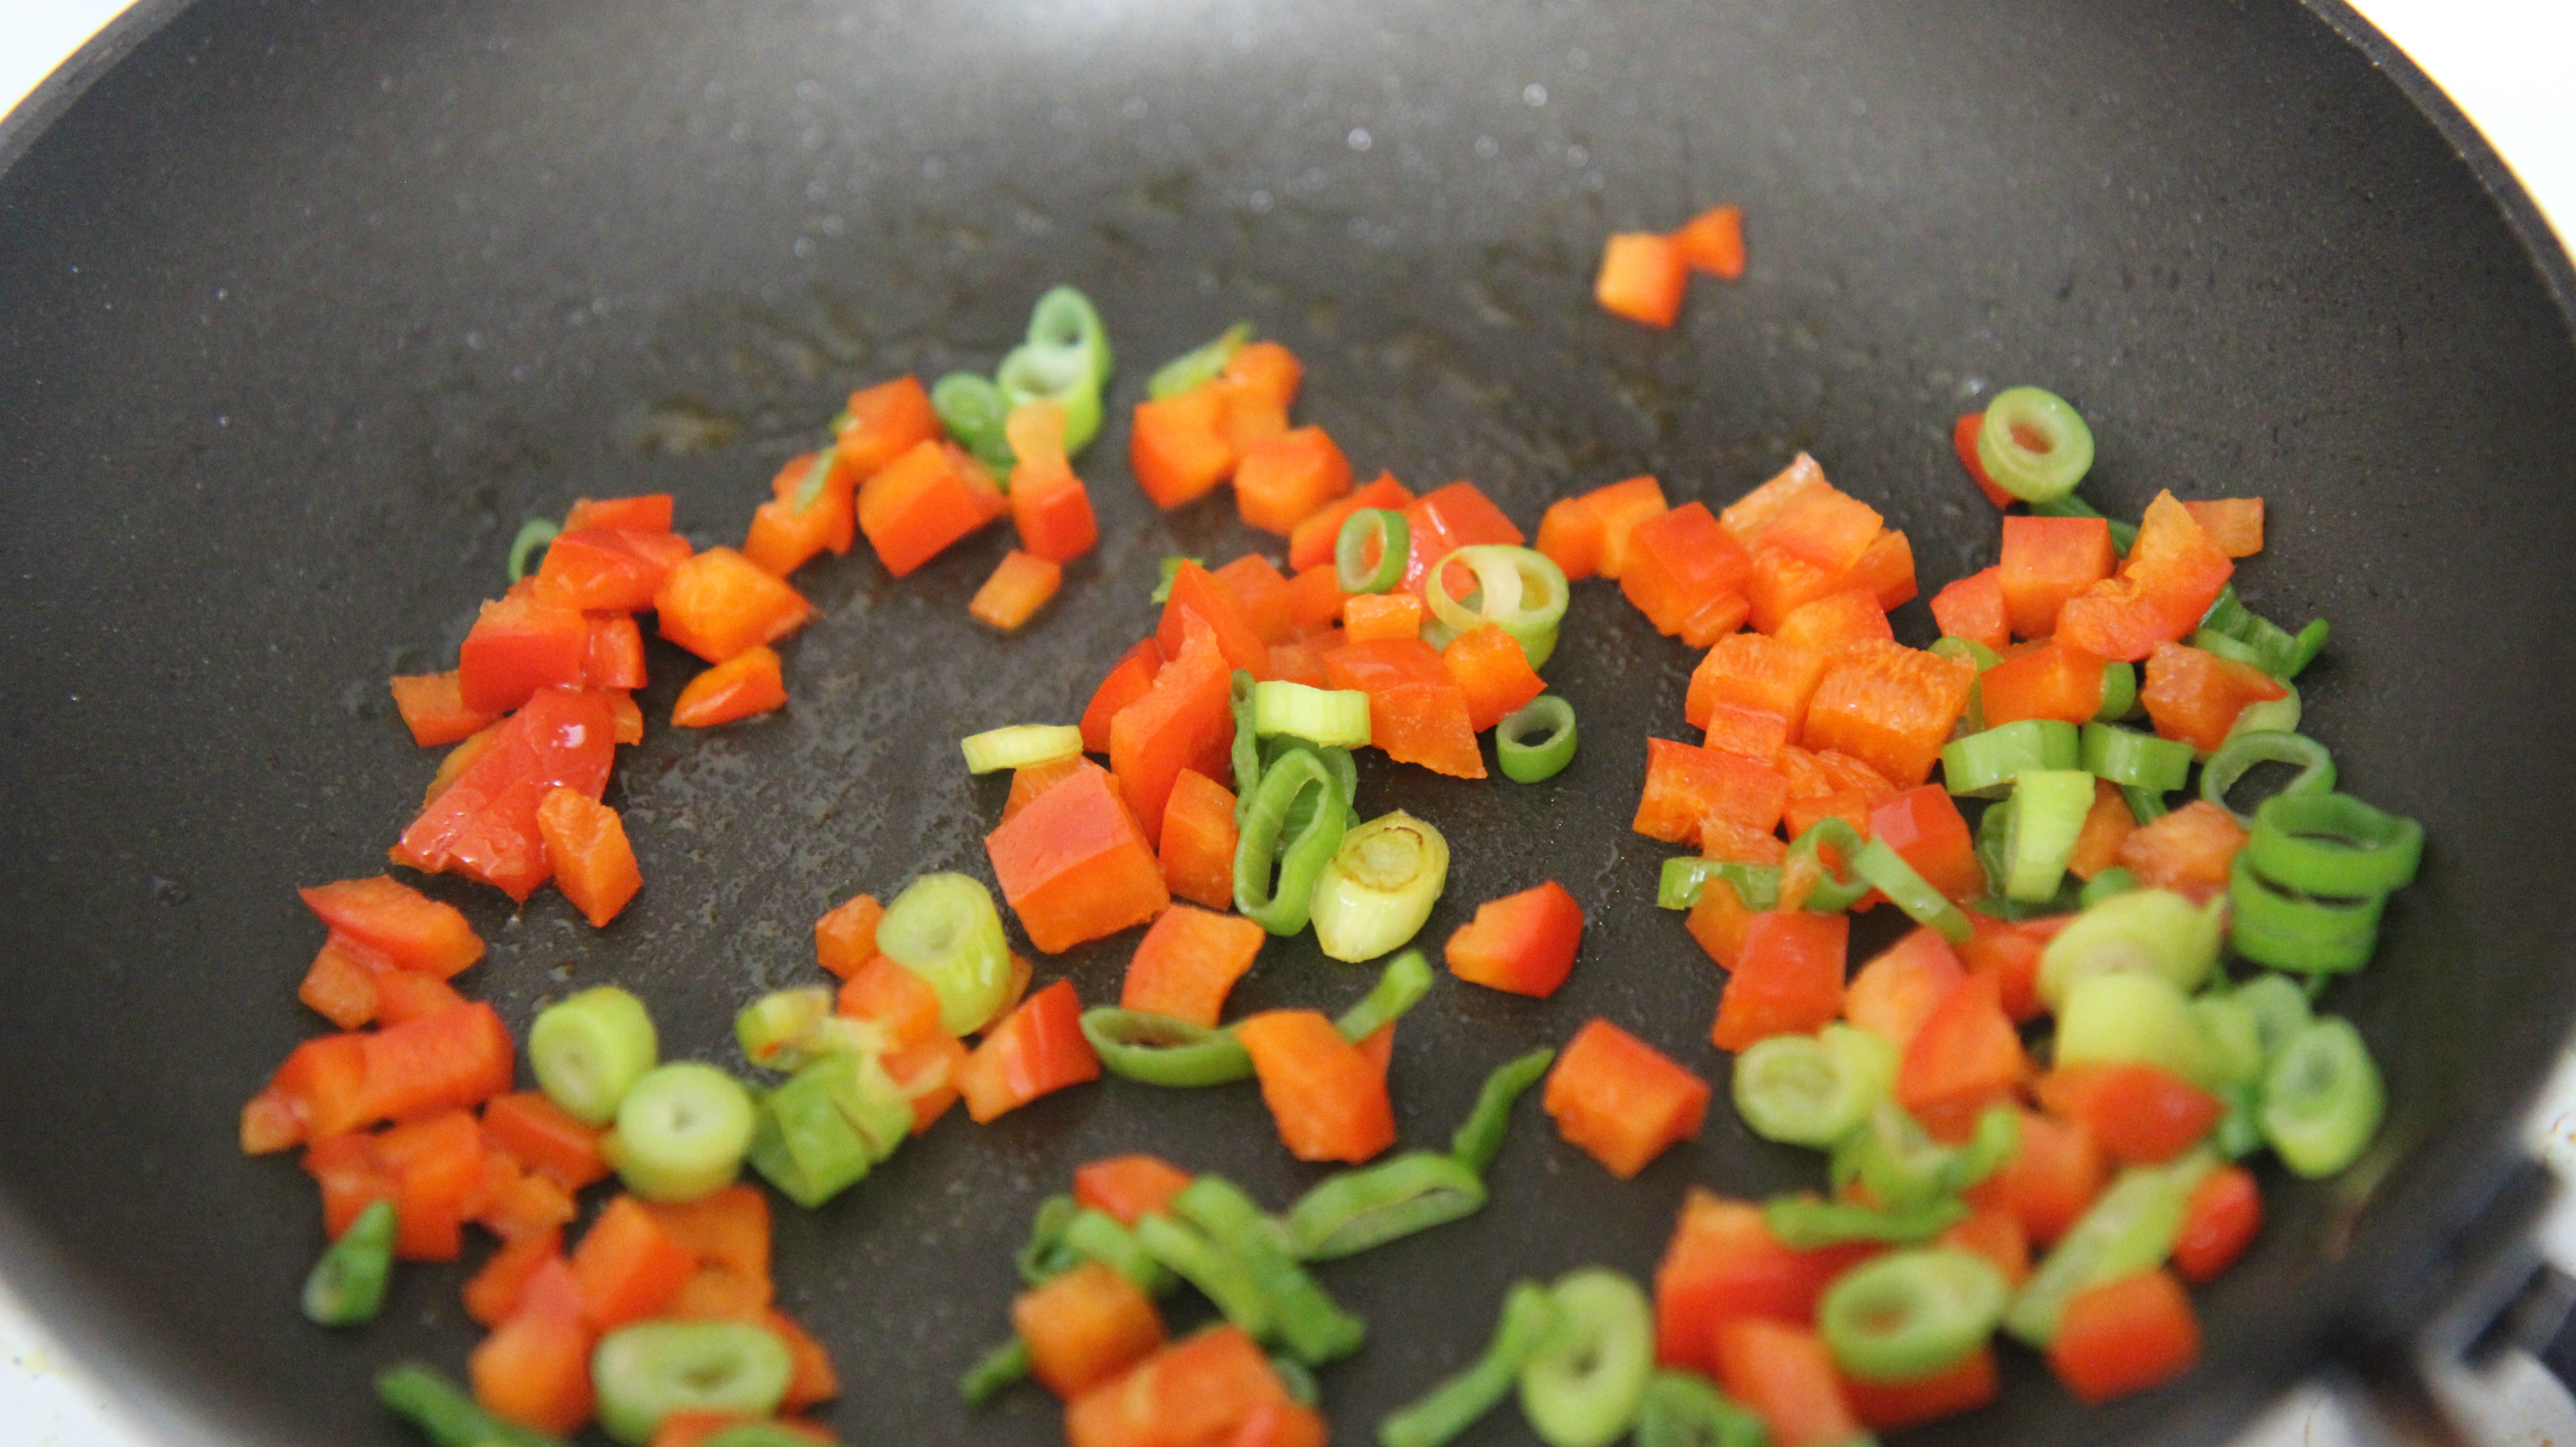 Saute chopped red bell peppers and green onions in a pan. 